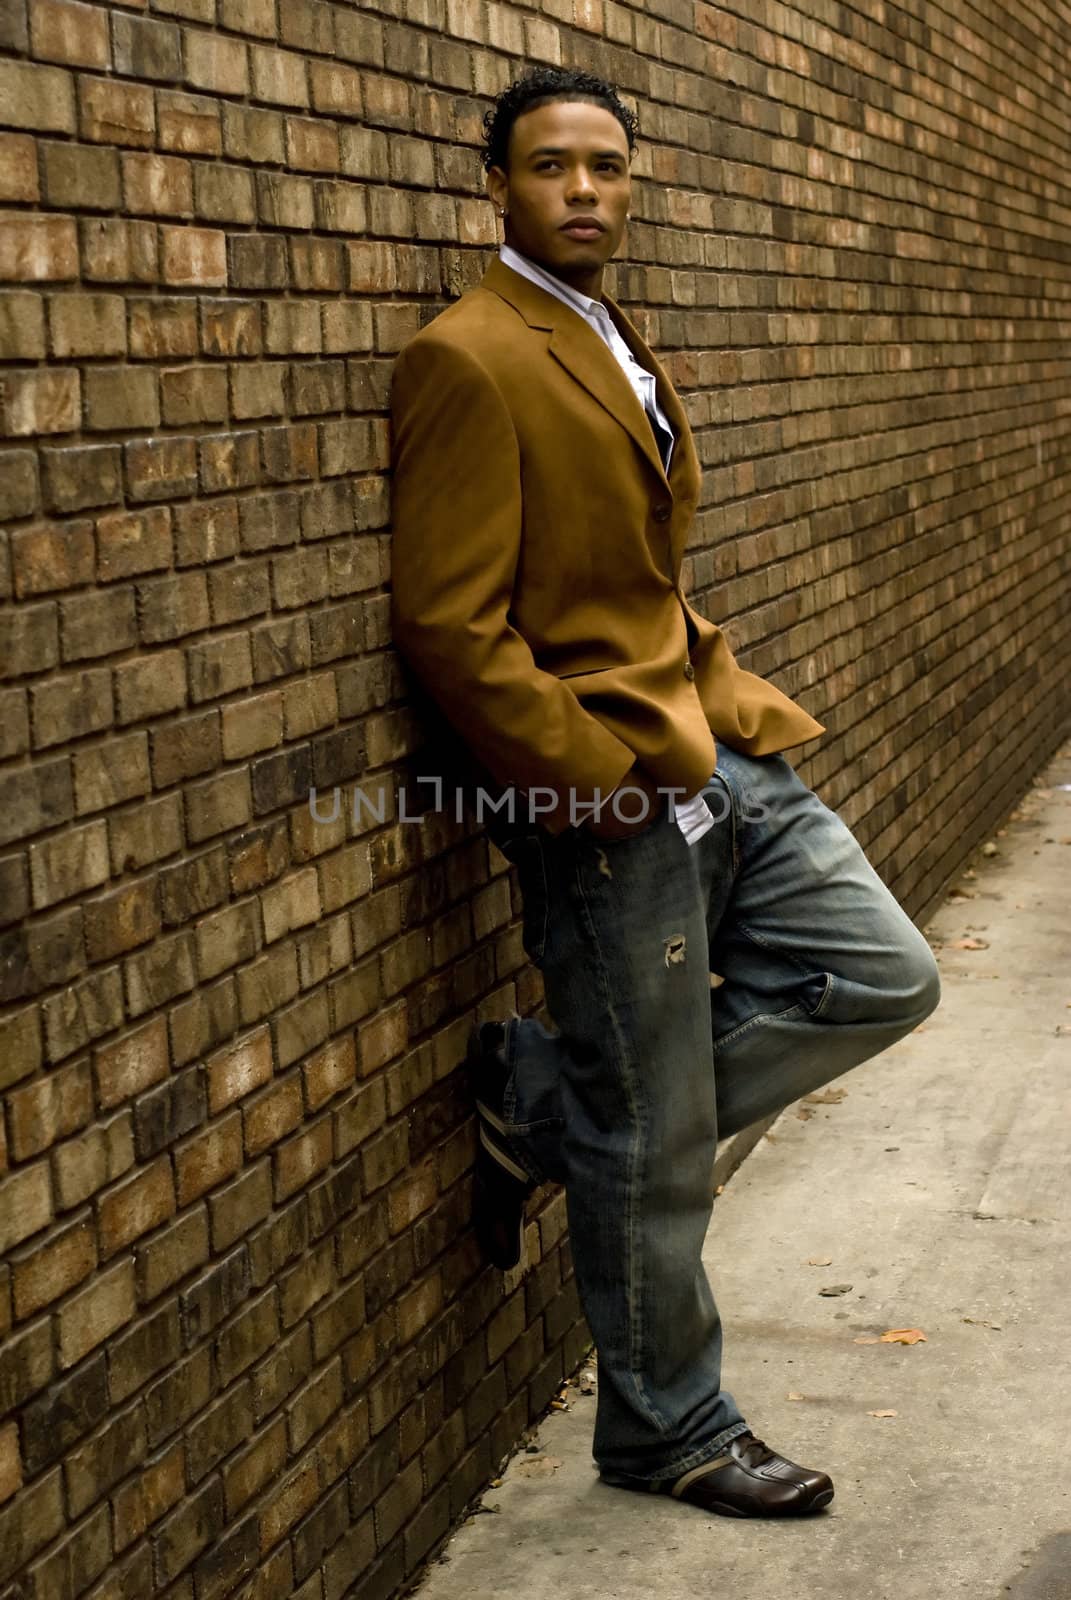 Attractive young man in a suit and jeans against a brick wall.